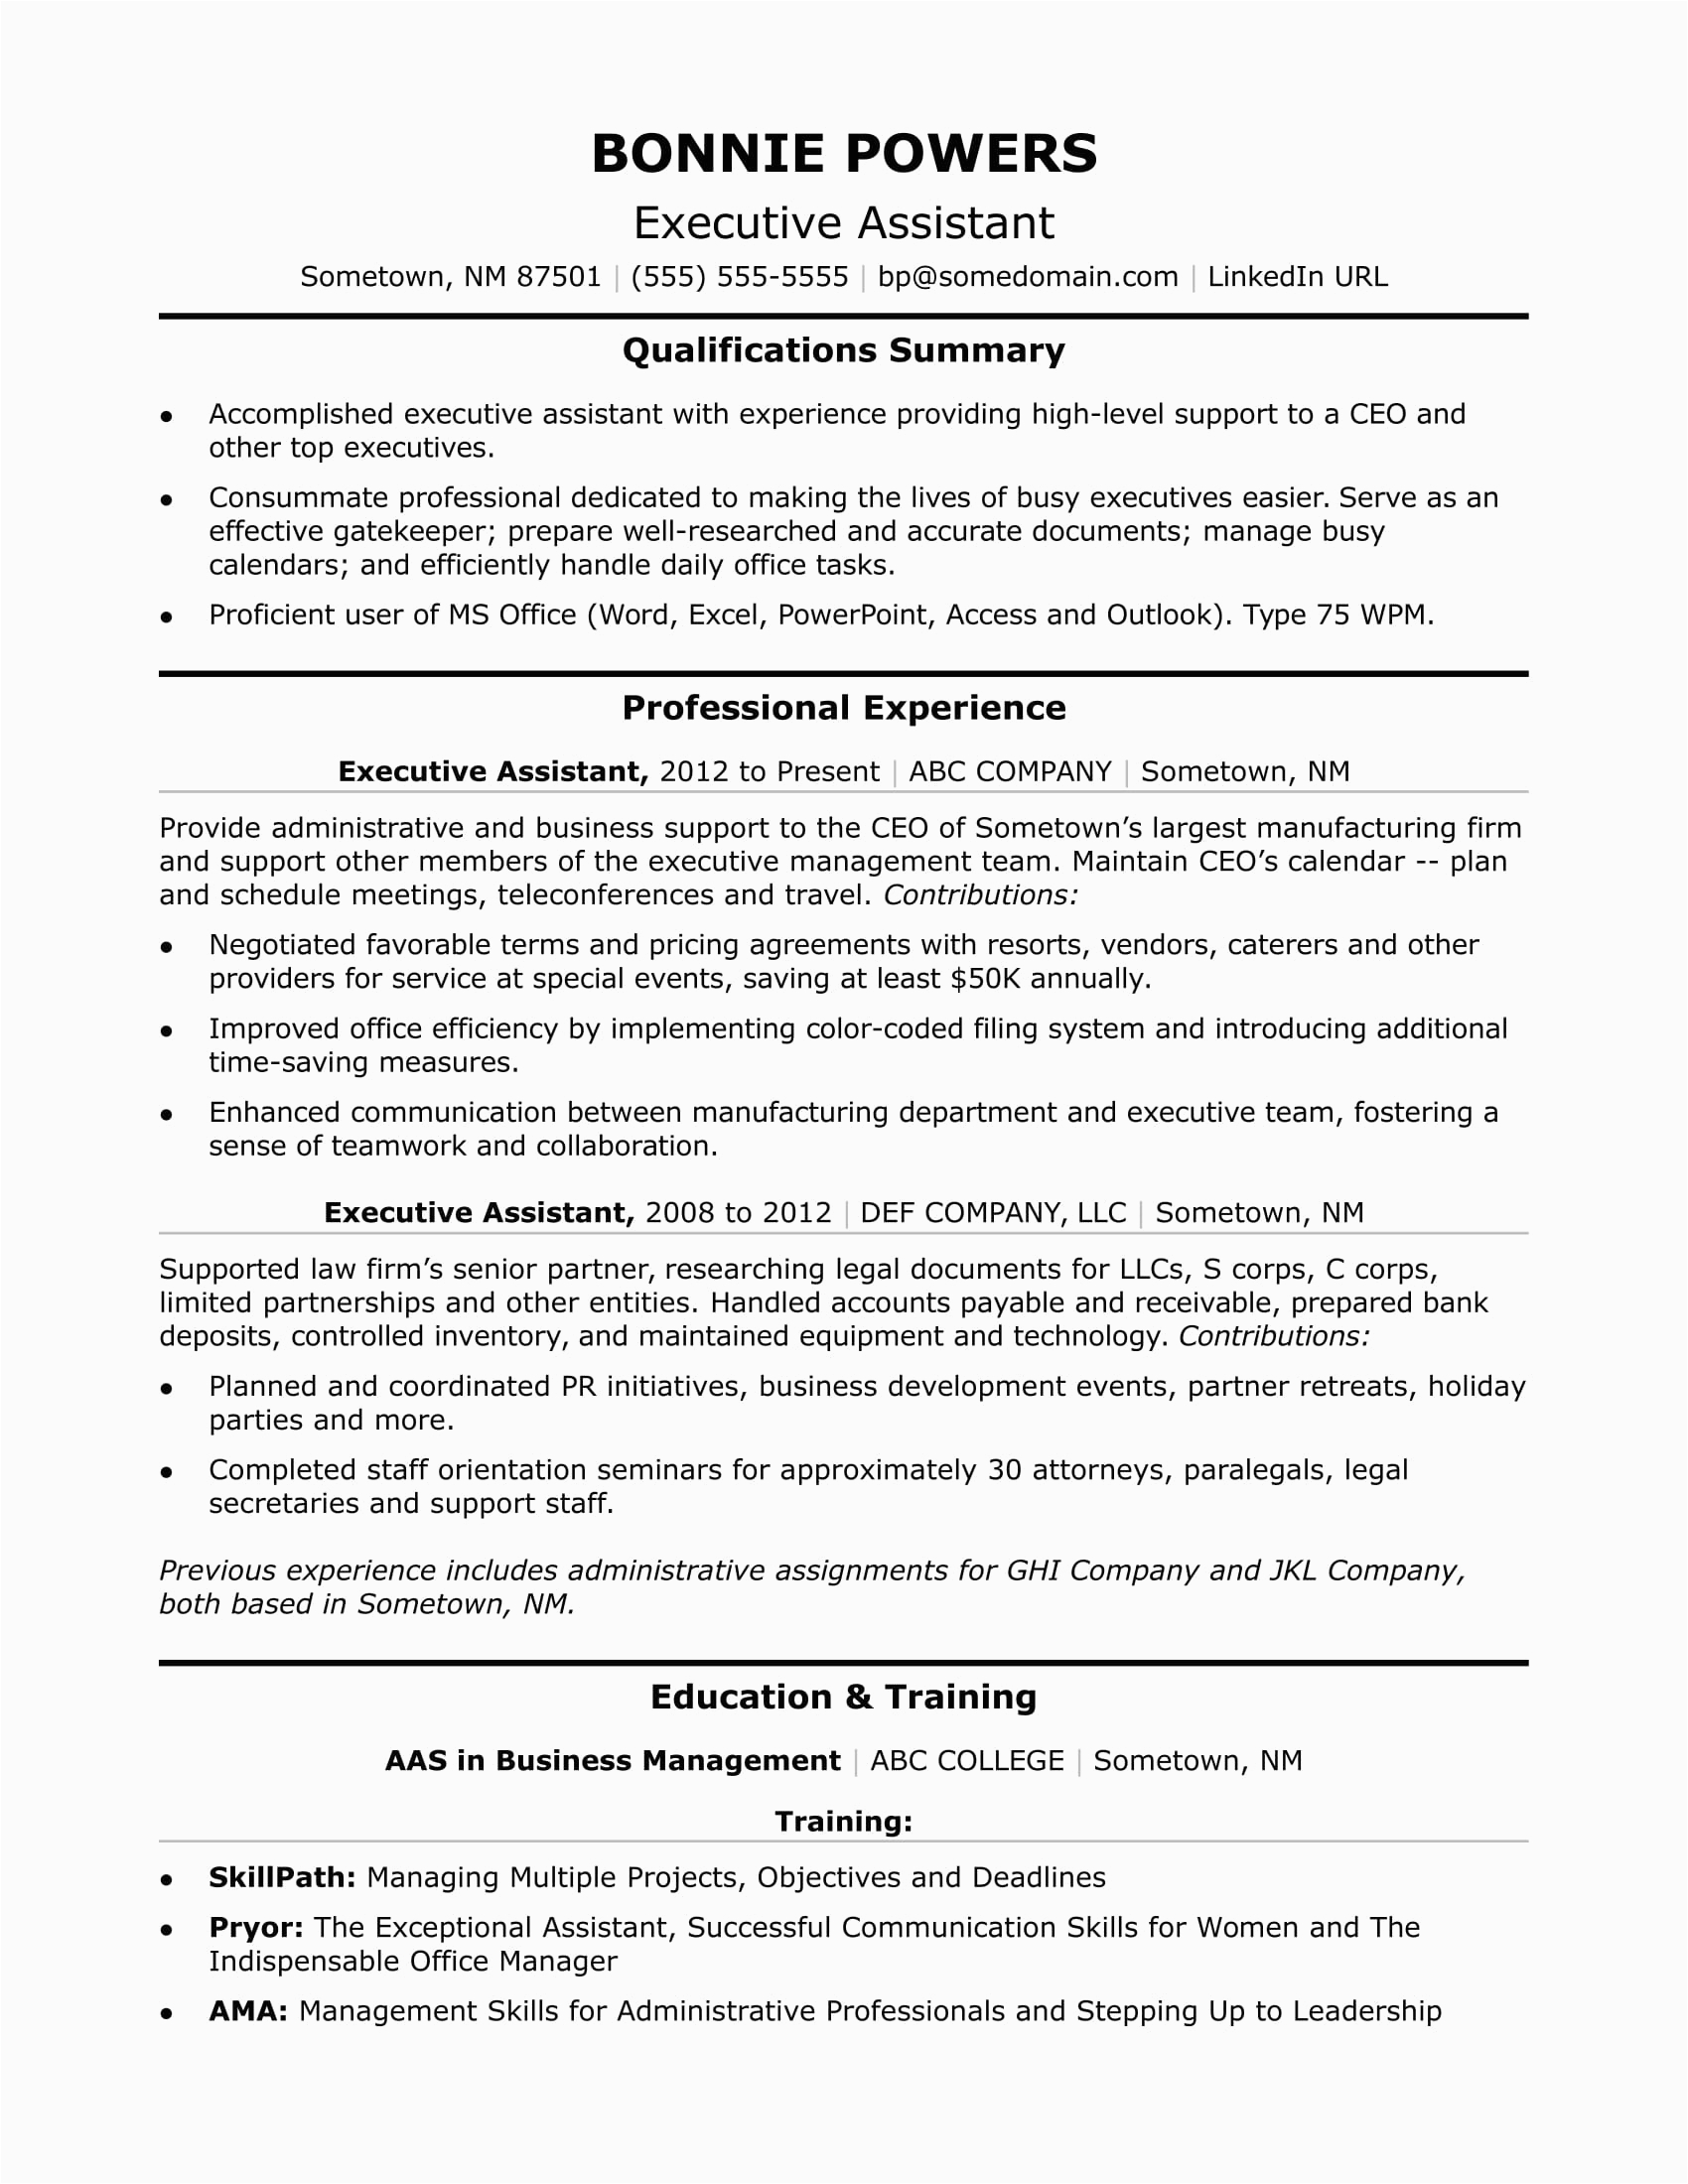 Sample Functional Resume for Executive assistant Executive Administrative assistant Resume Sample